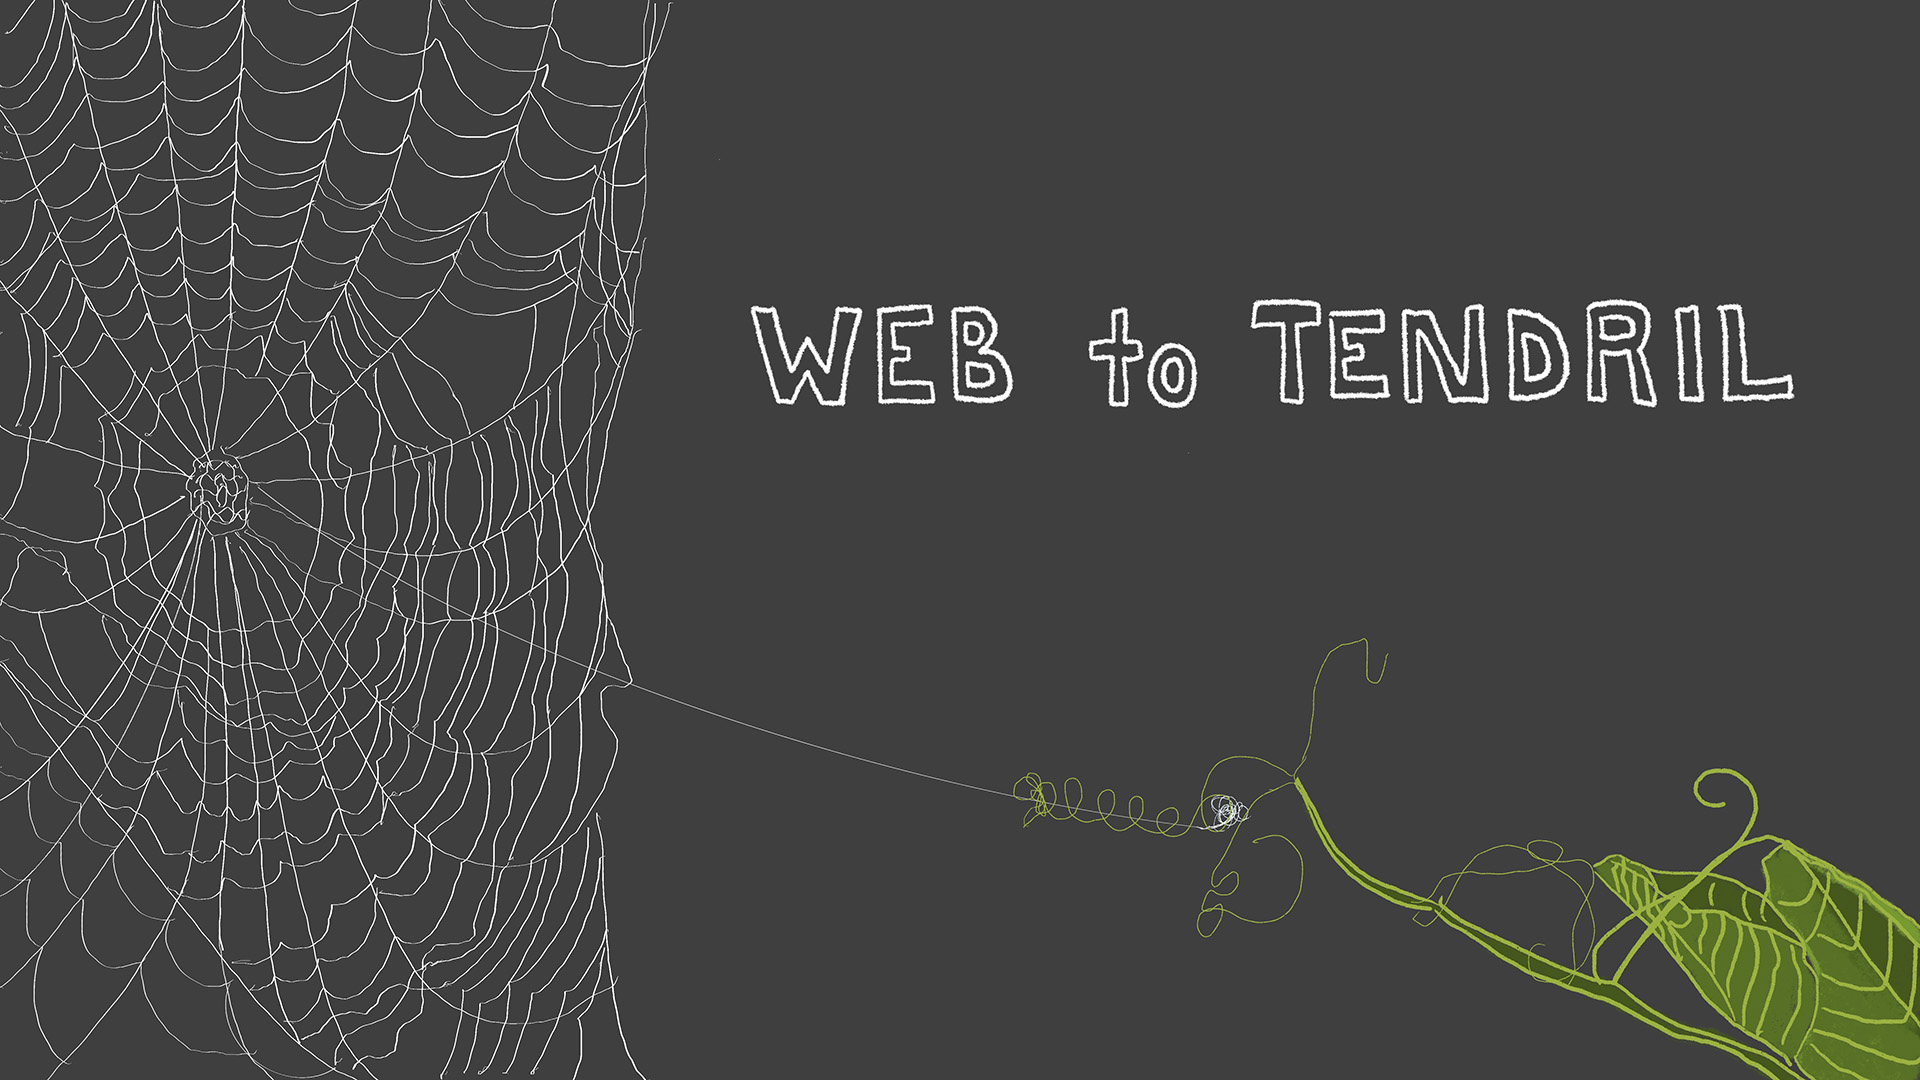 An illustration of a spider web clinging to the tendril of a pea vine